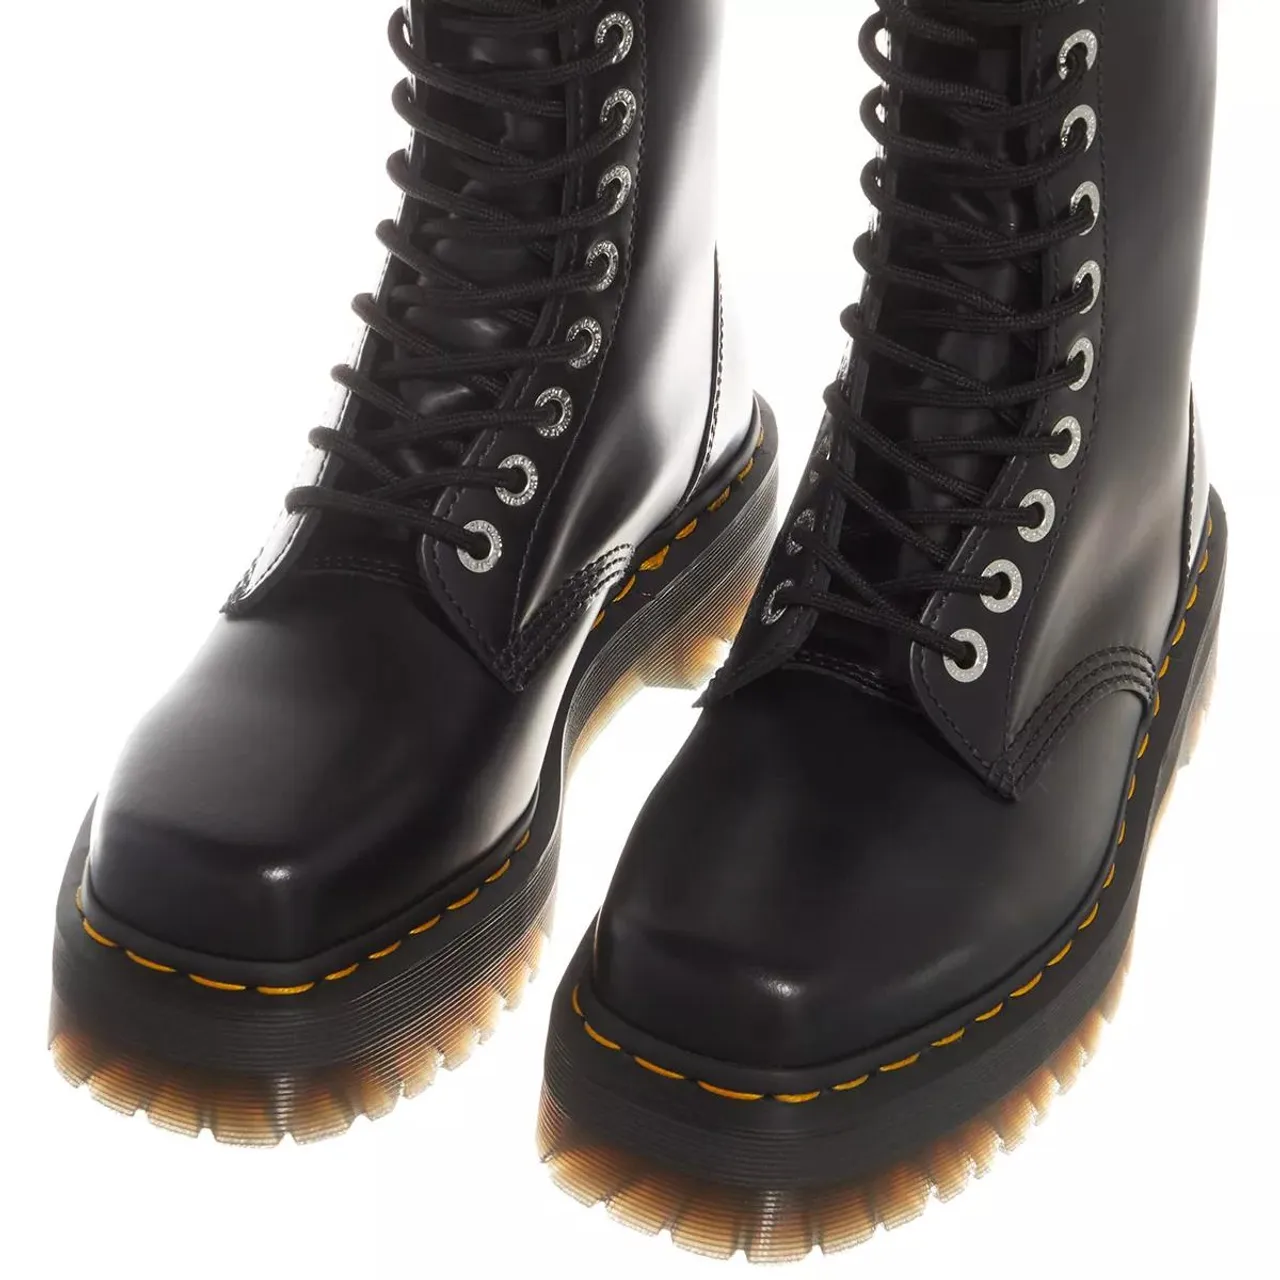 Dr. Martens Boots & Ankle Boots - 1490 Quad Squared - black - Boots & Ankle Boots for ladies